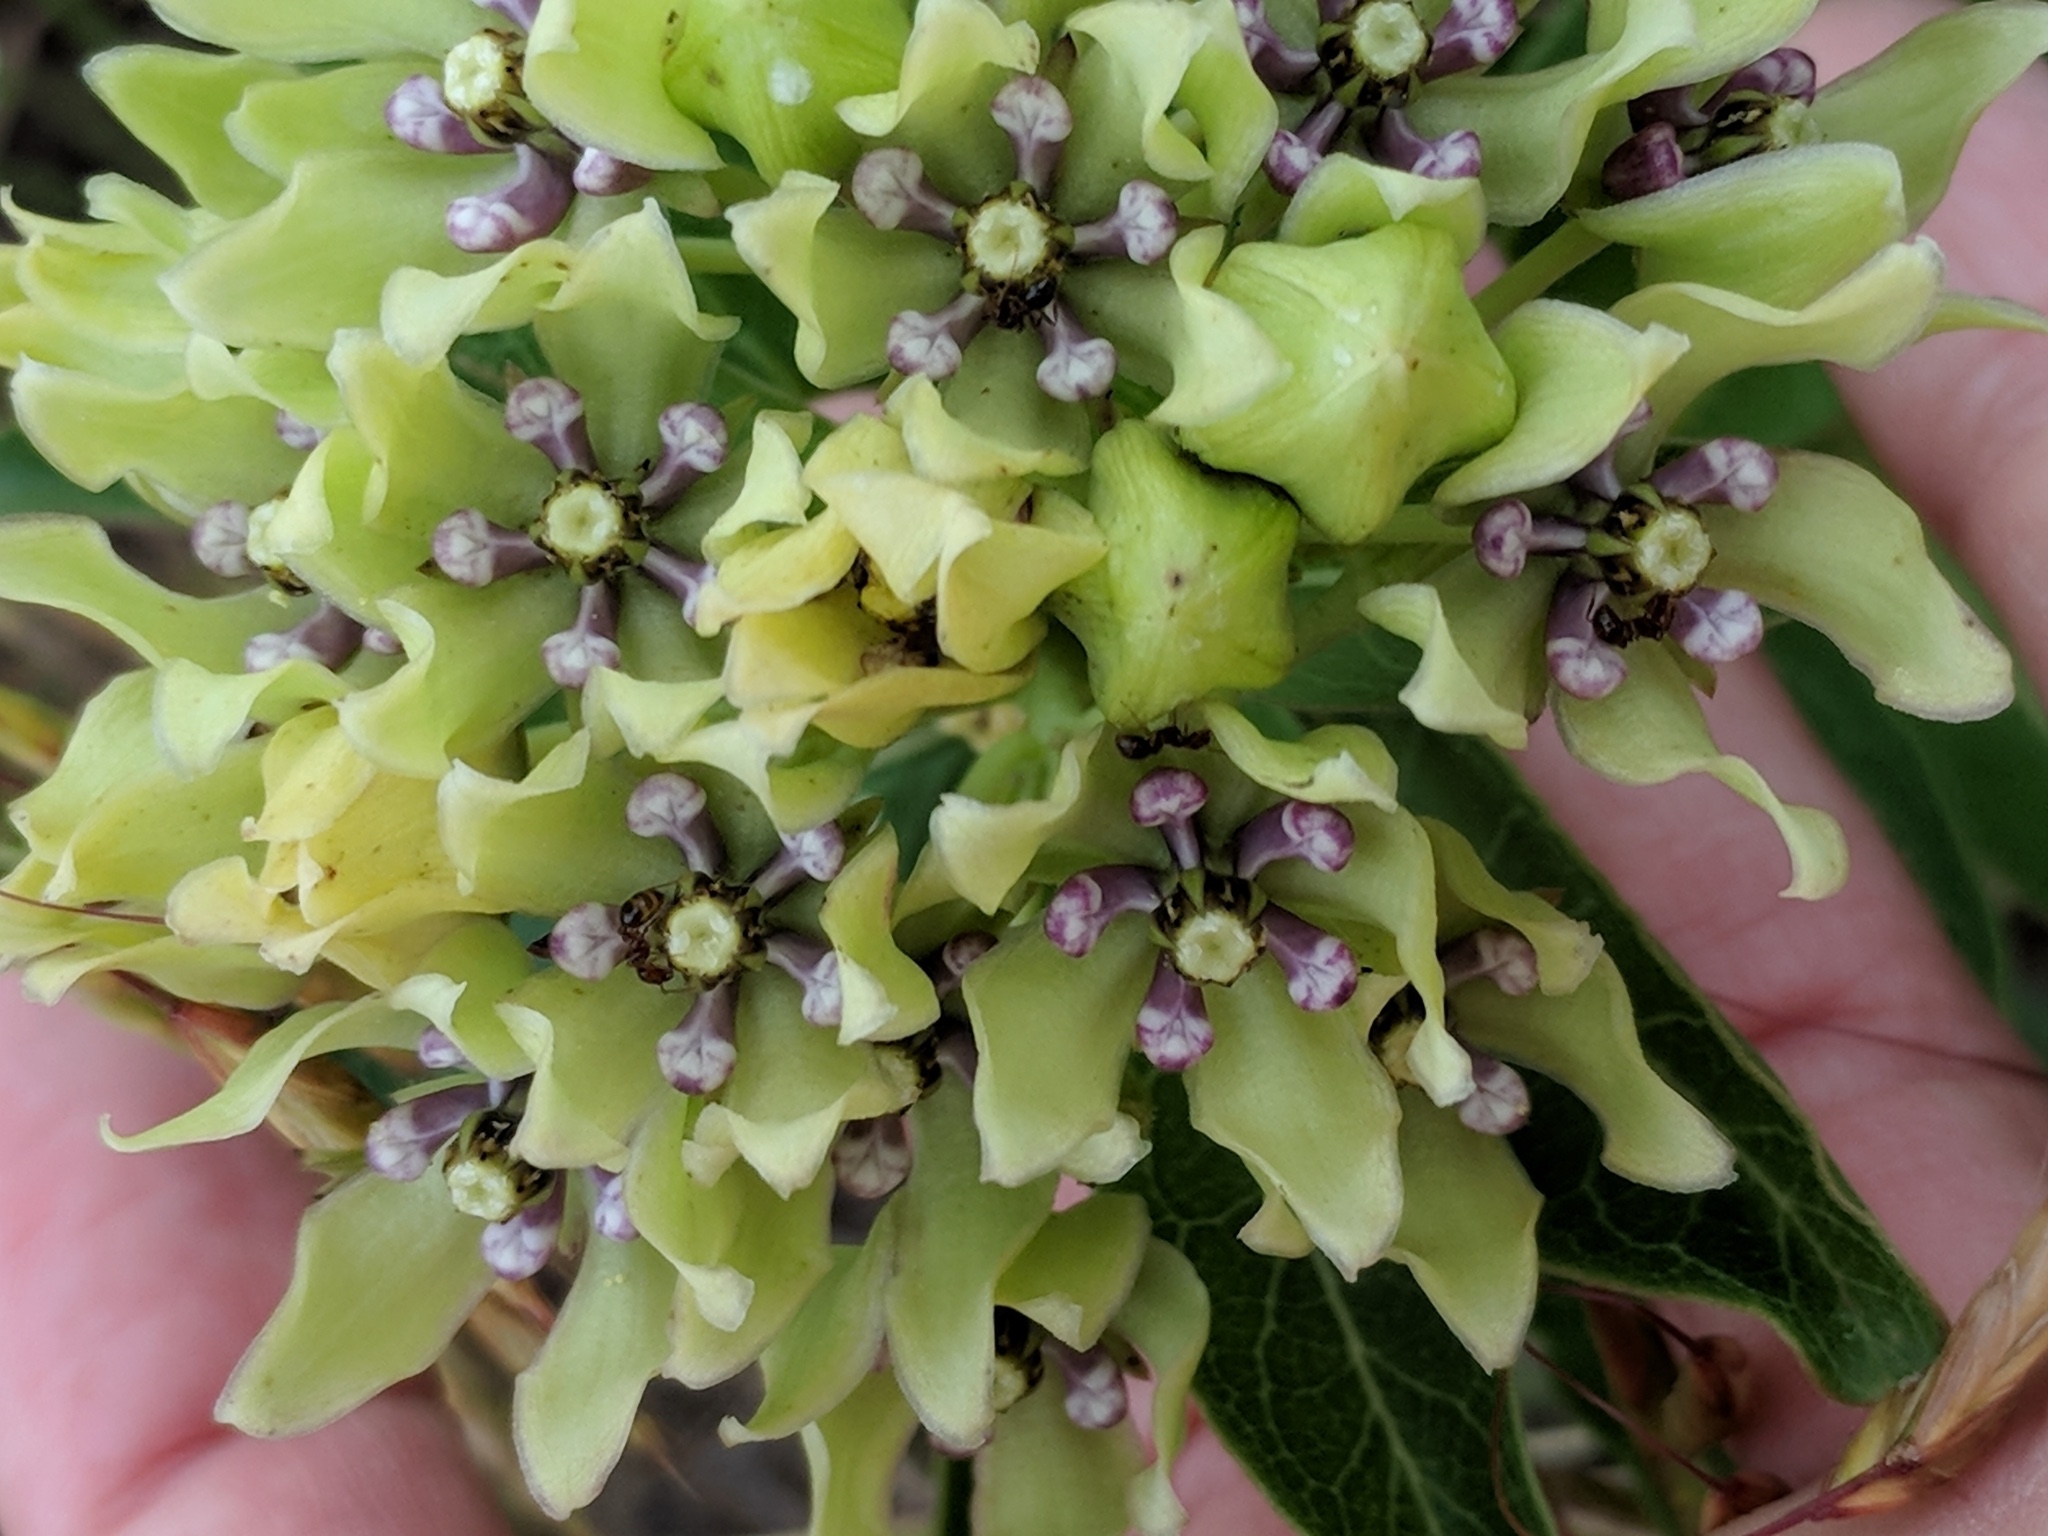 The Scientific Name is Asclepias viridis. You will likely hear them called Little Green Milkweed, Green Antelope-horn, Spider Milkweed. This picture shows the Tiny green flowers with purple hoods.  of Asclepias viridis